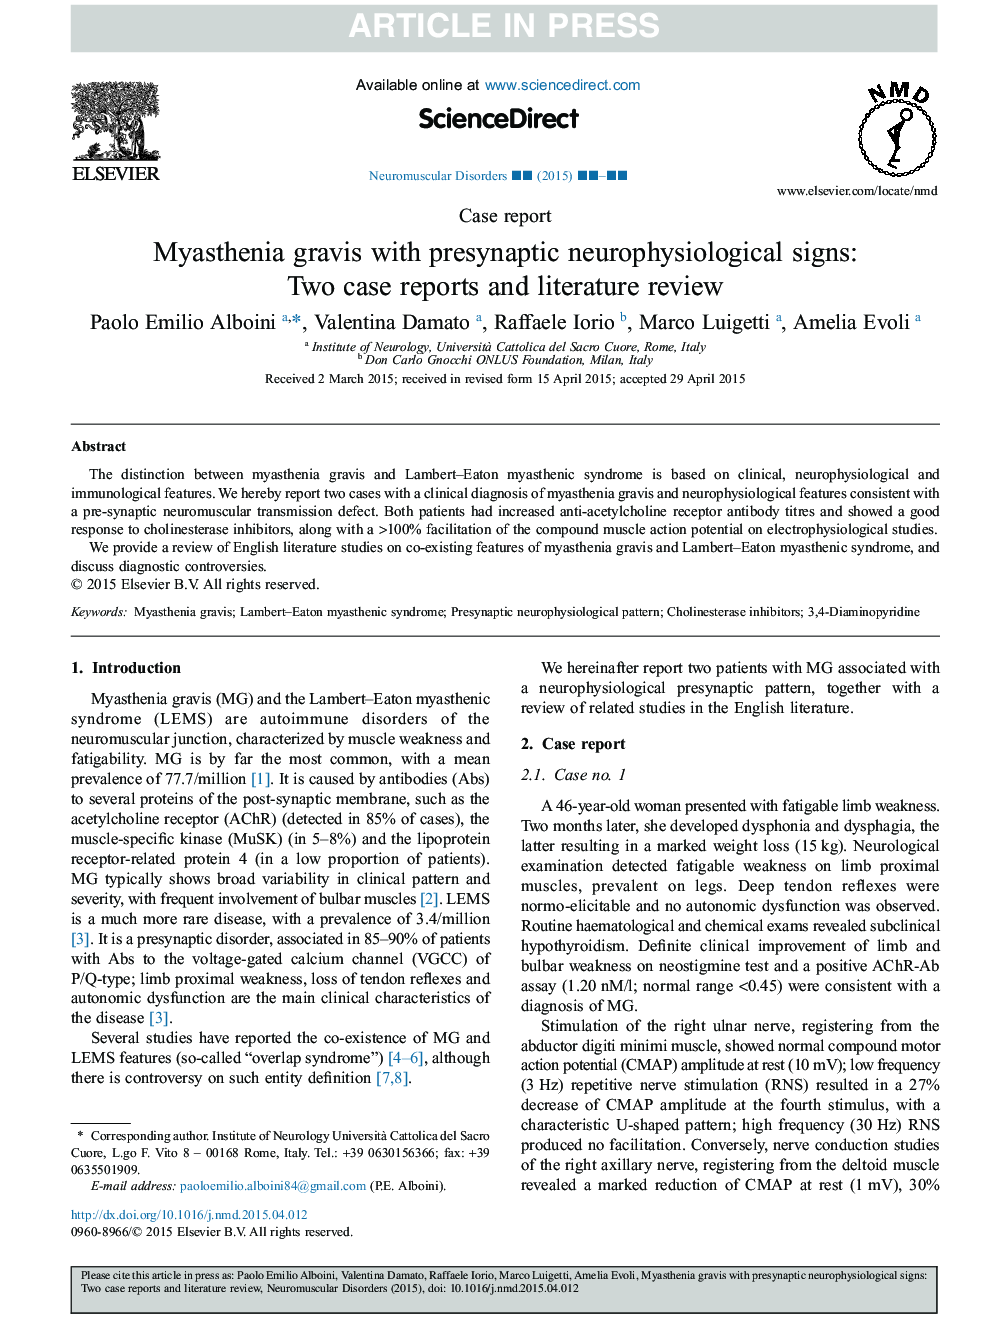 Myasthenia gravis with presynaptic neurophysiological signs: Two case reports and literature review